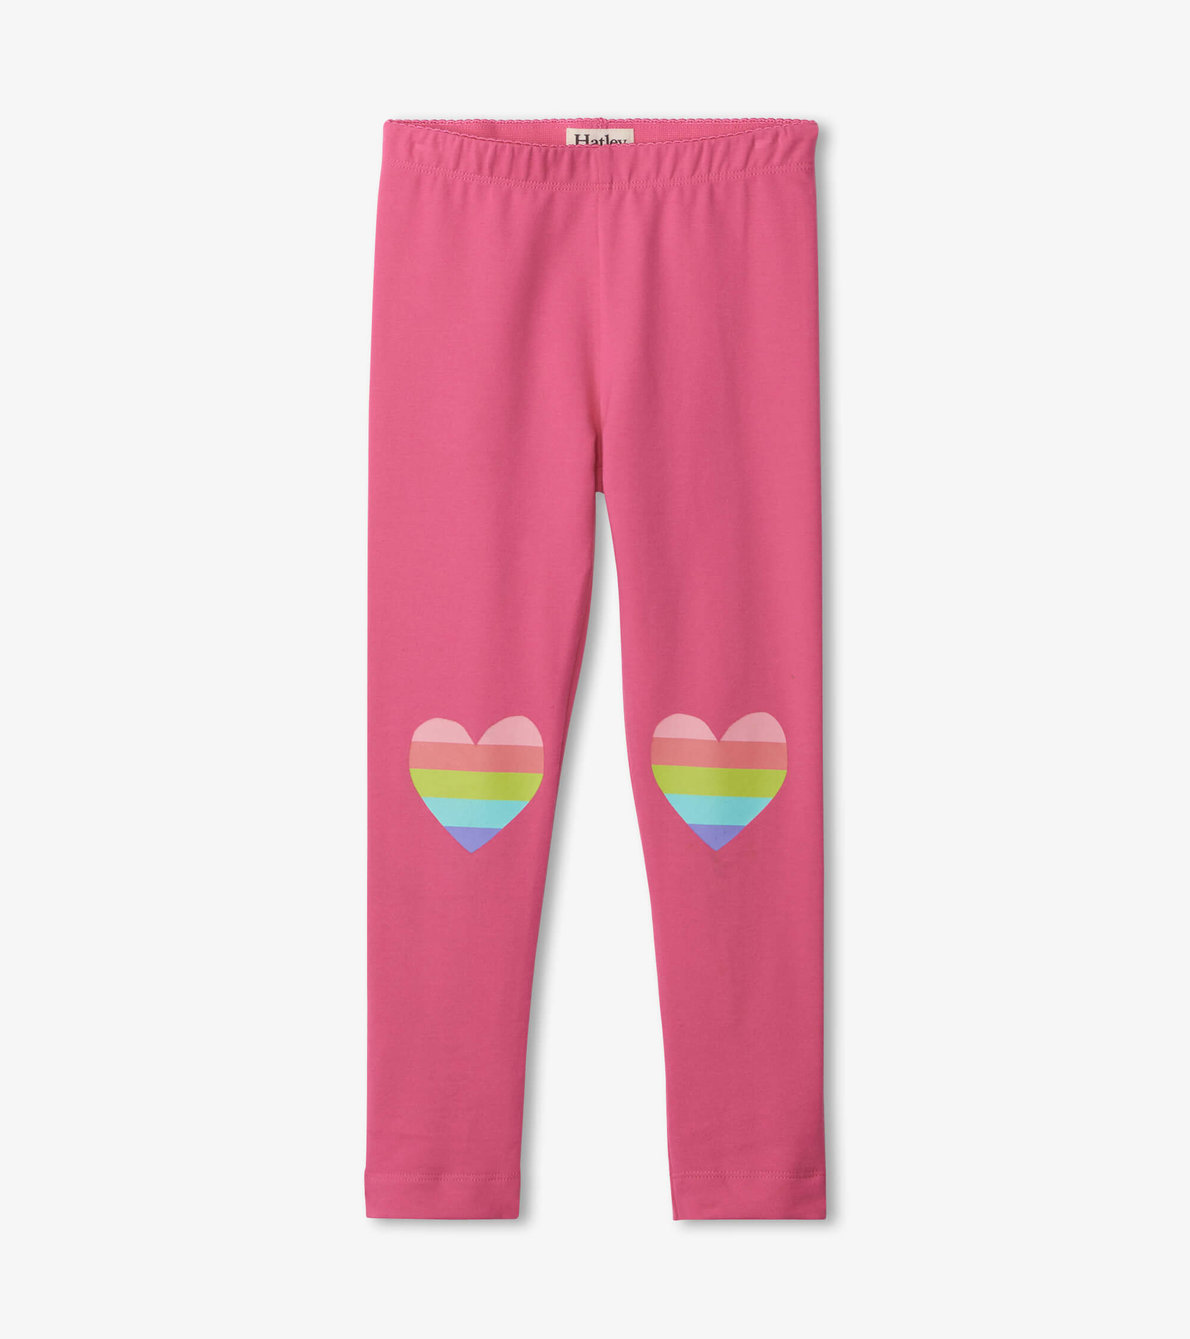 View larger image of Rainbow Heart Leggings